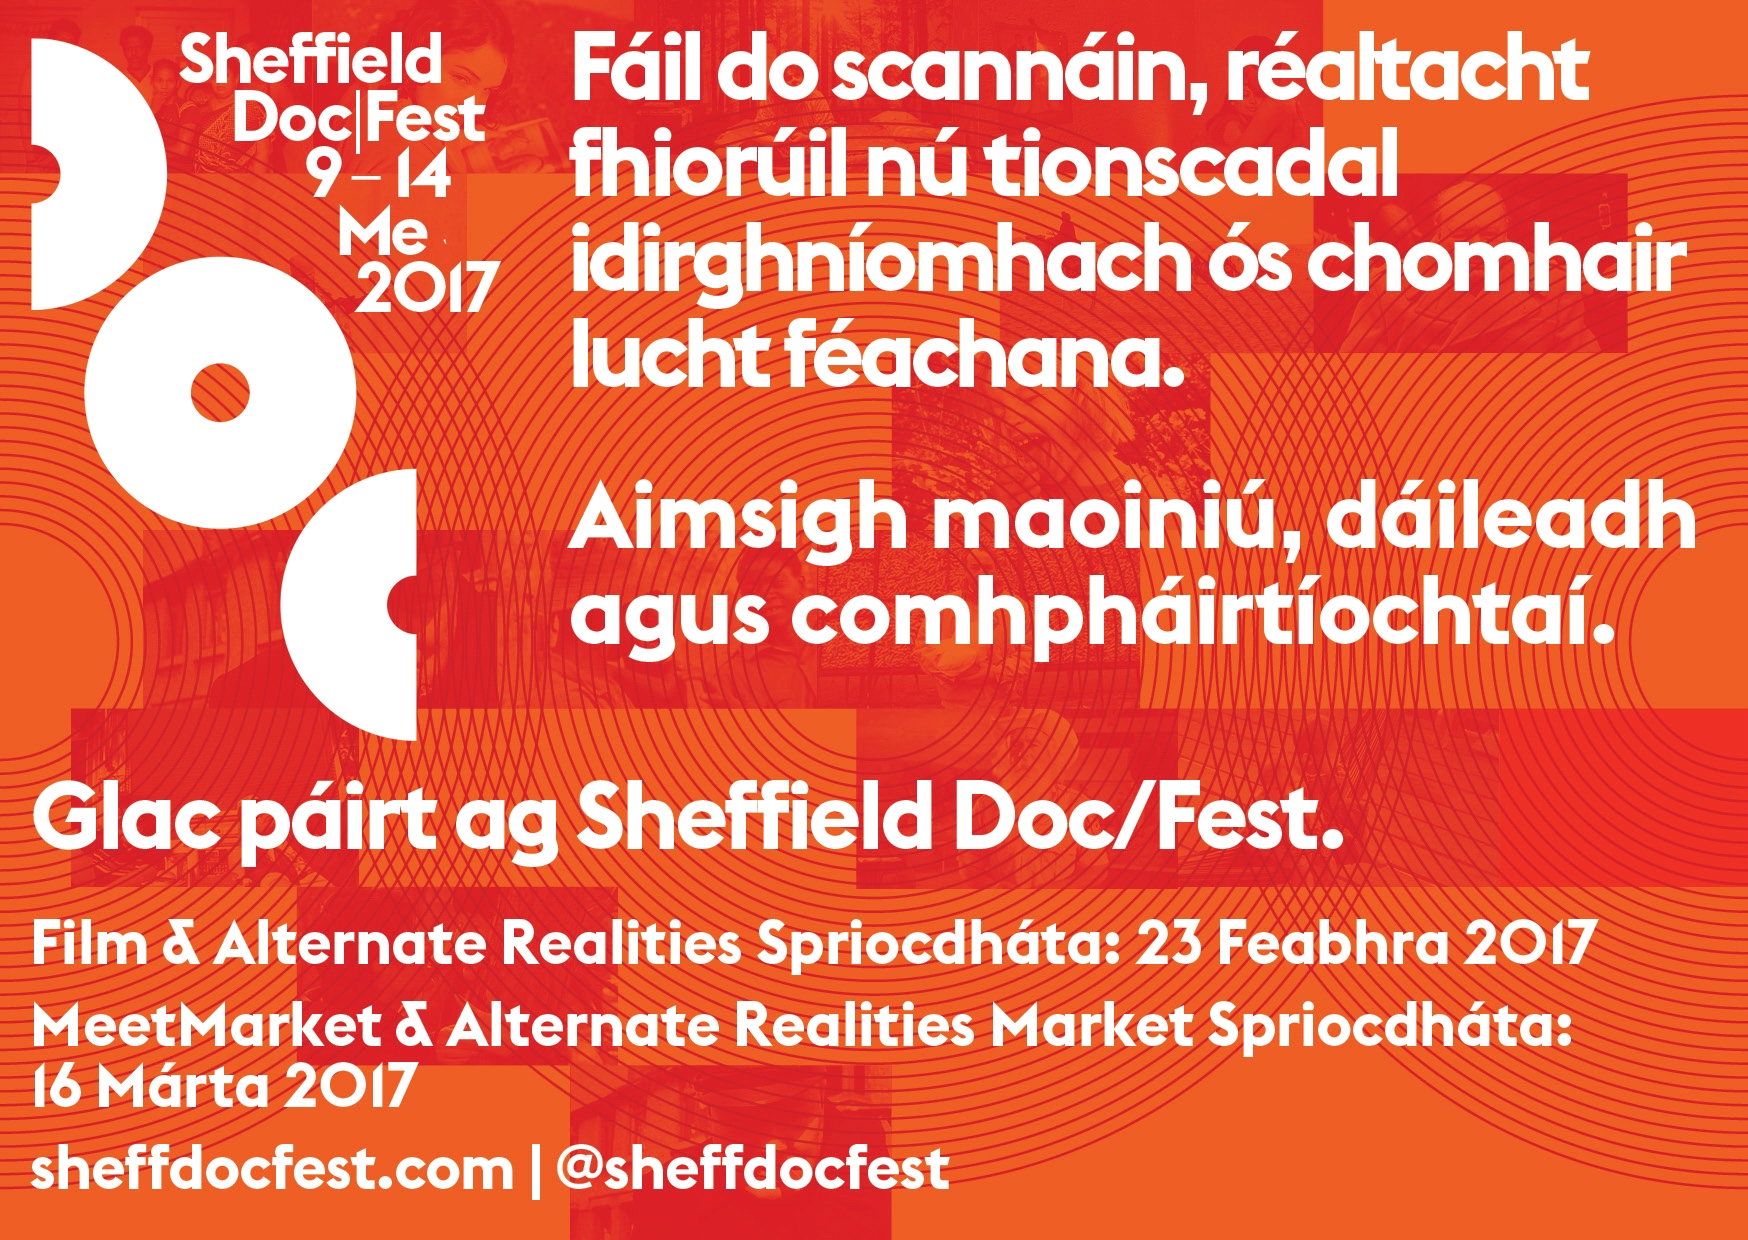 Sheffield Doc/Fest Submissions 2017